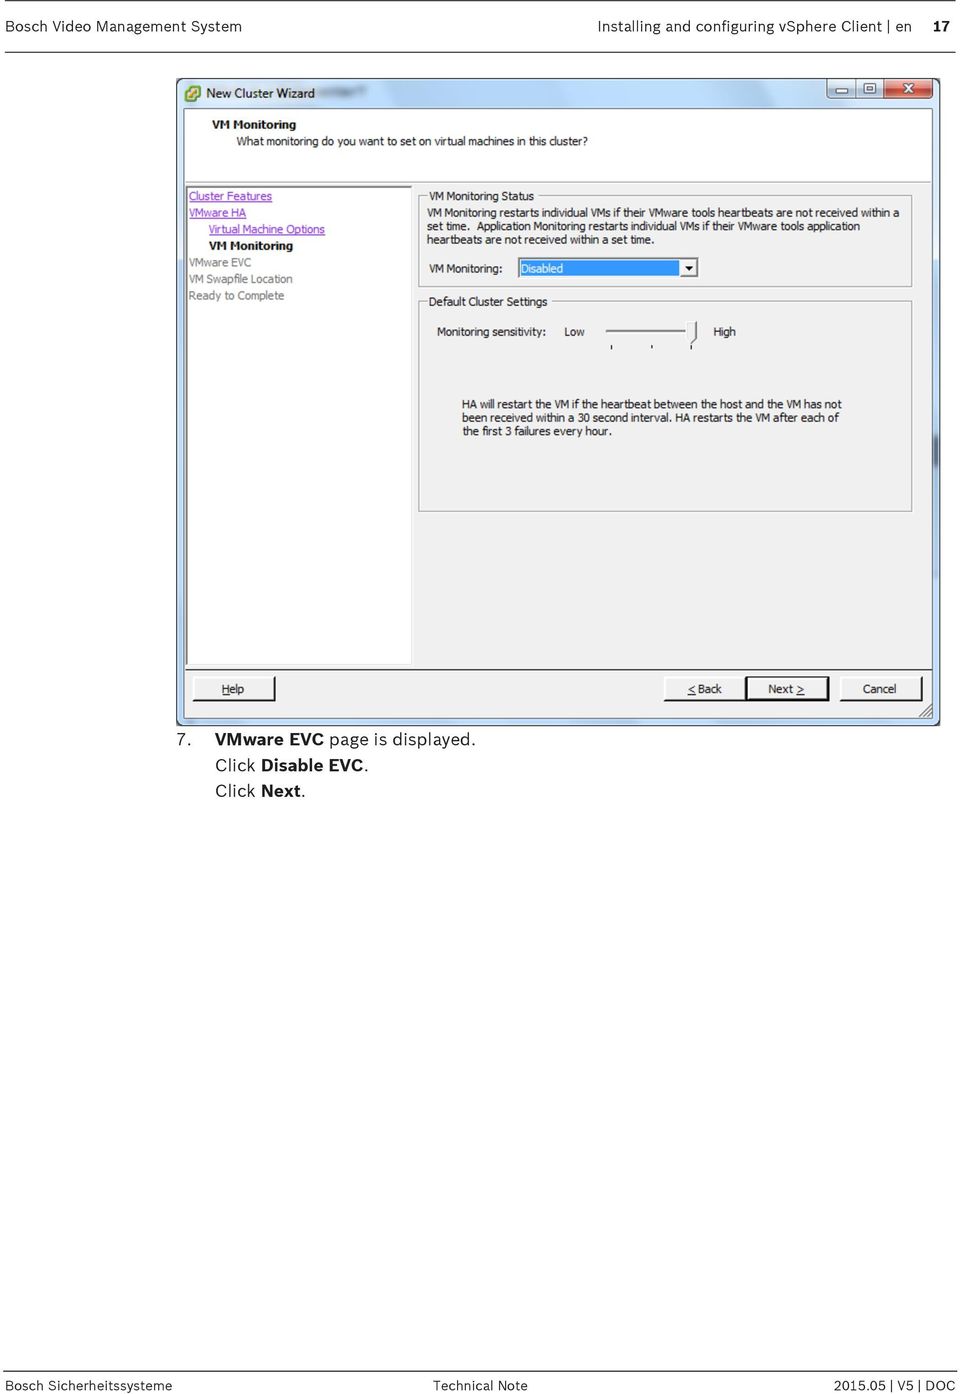 VMware EVC page is displayed. Click Disable EVC.